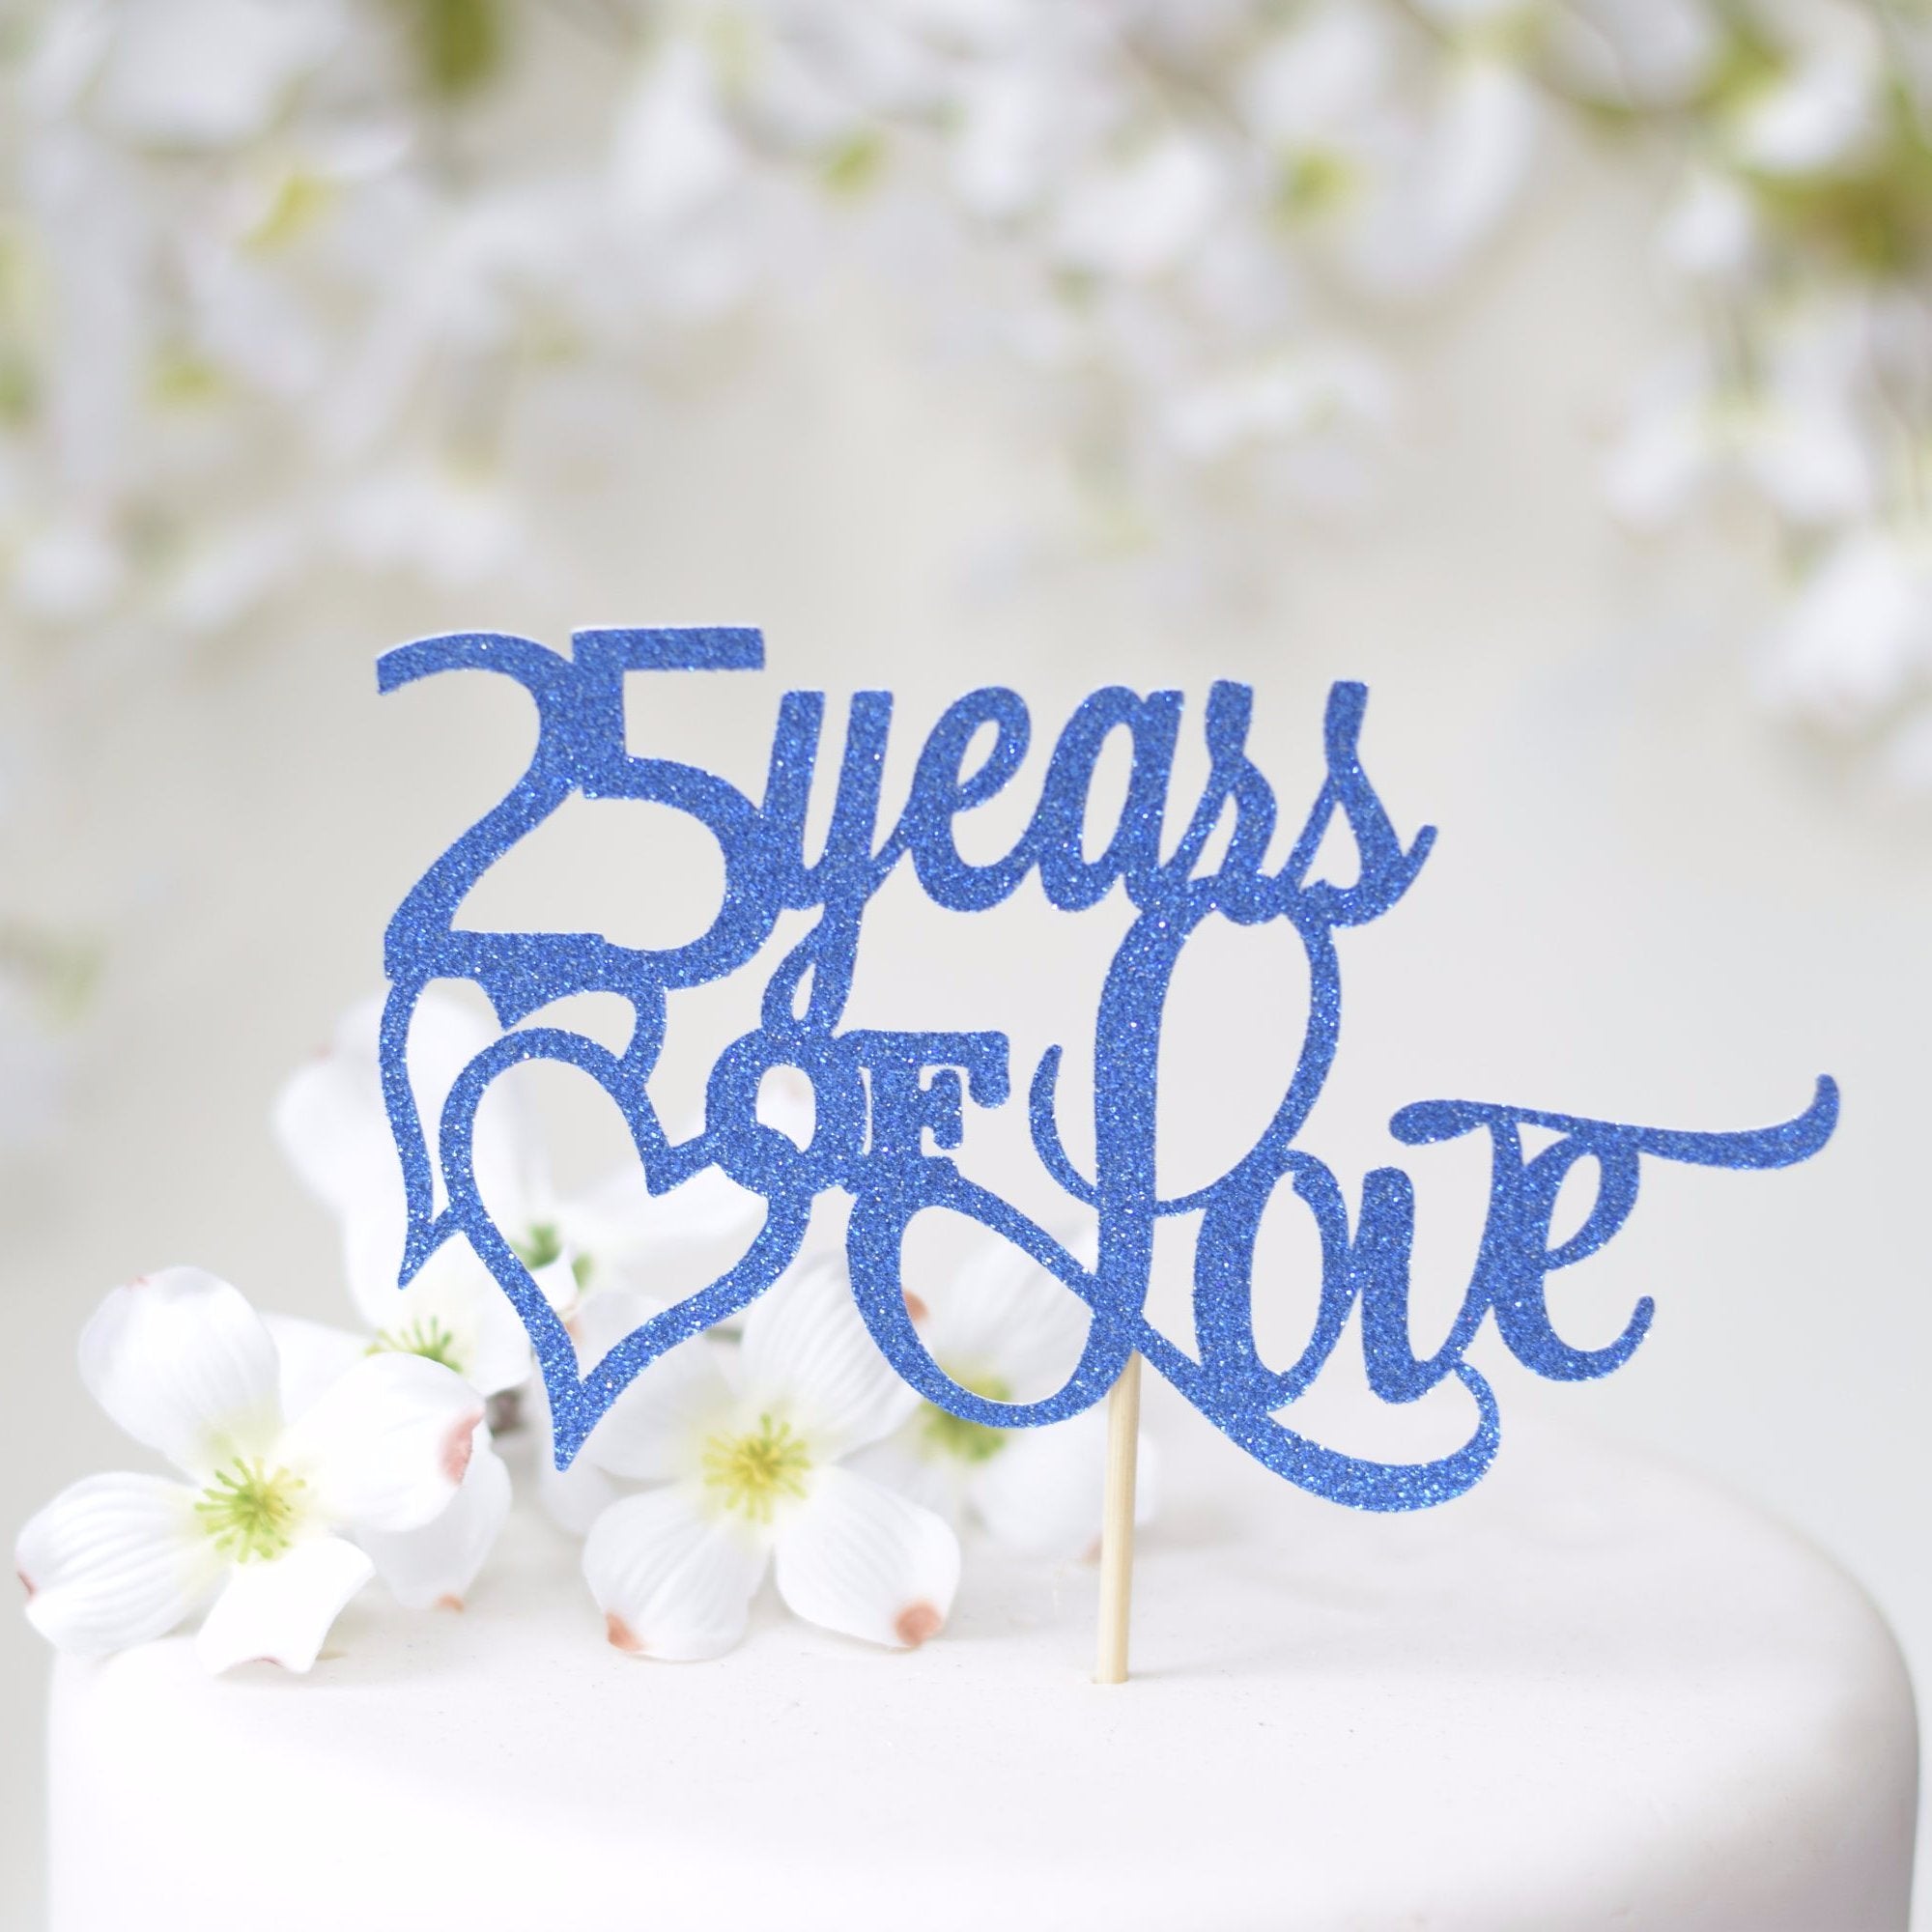 Personalised Silver 25th Anniversary Cake Topper - From Willow